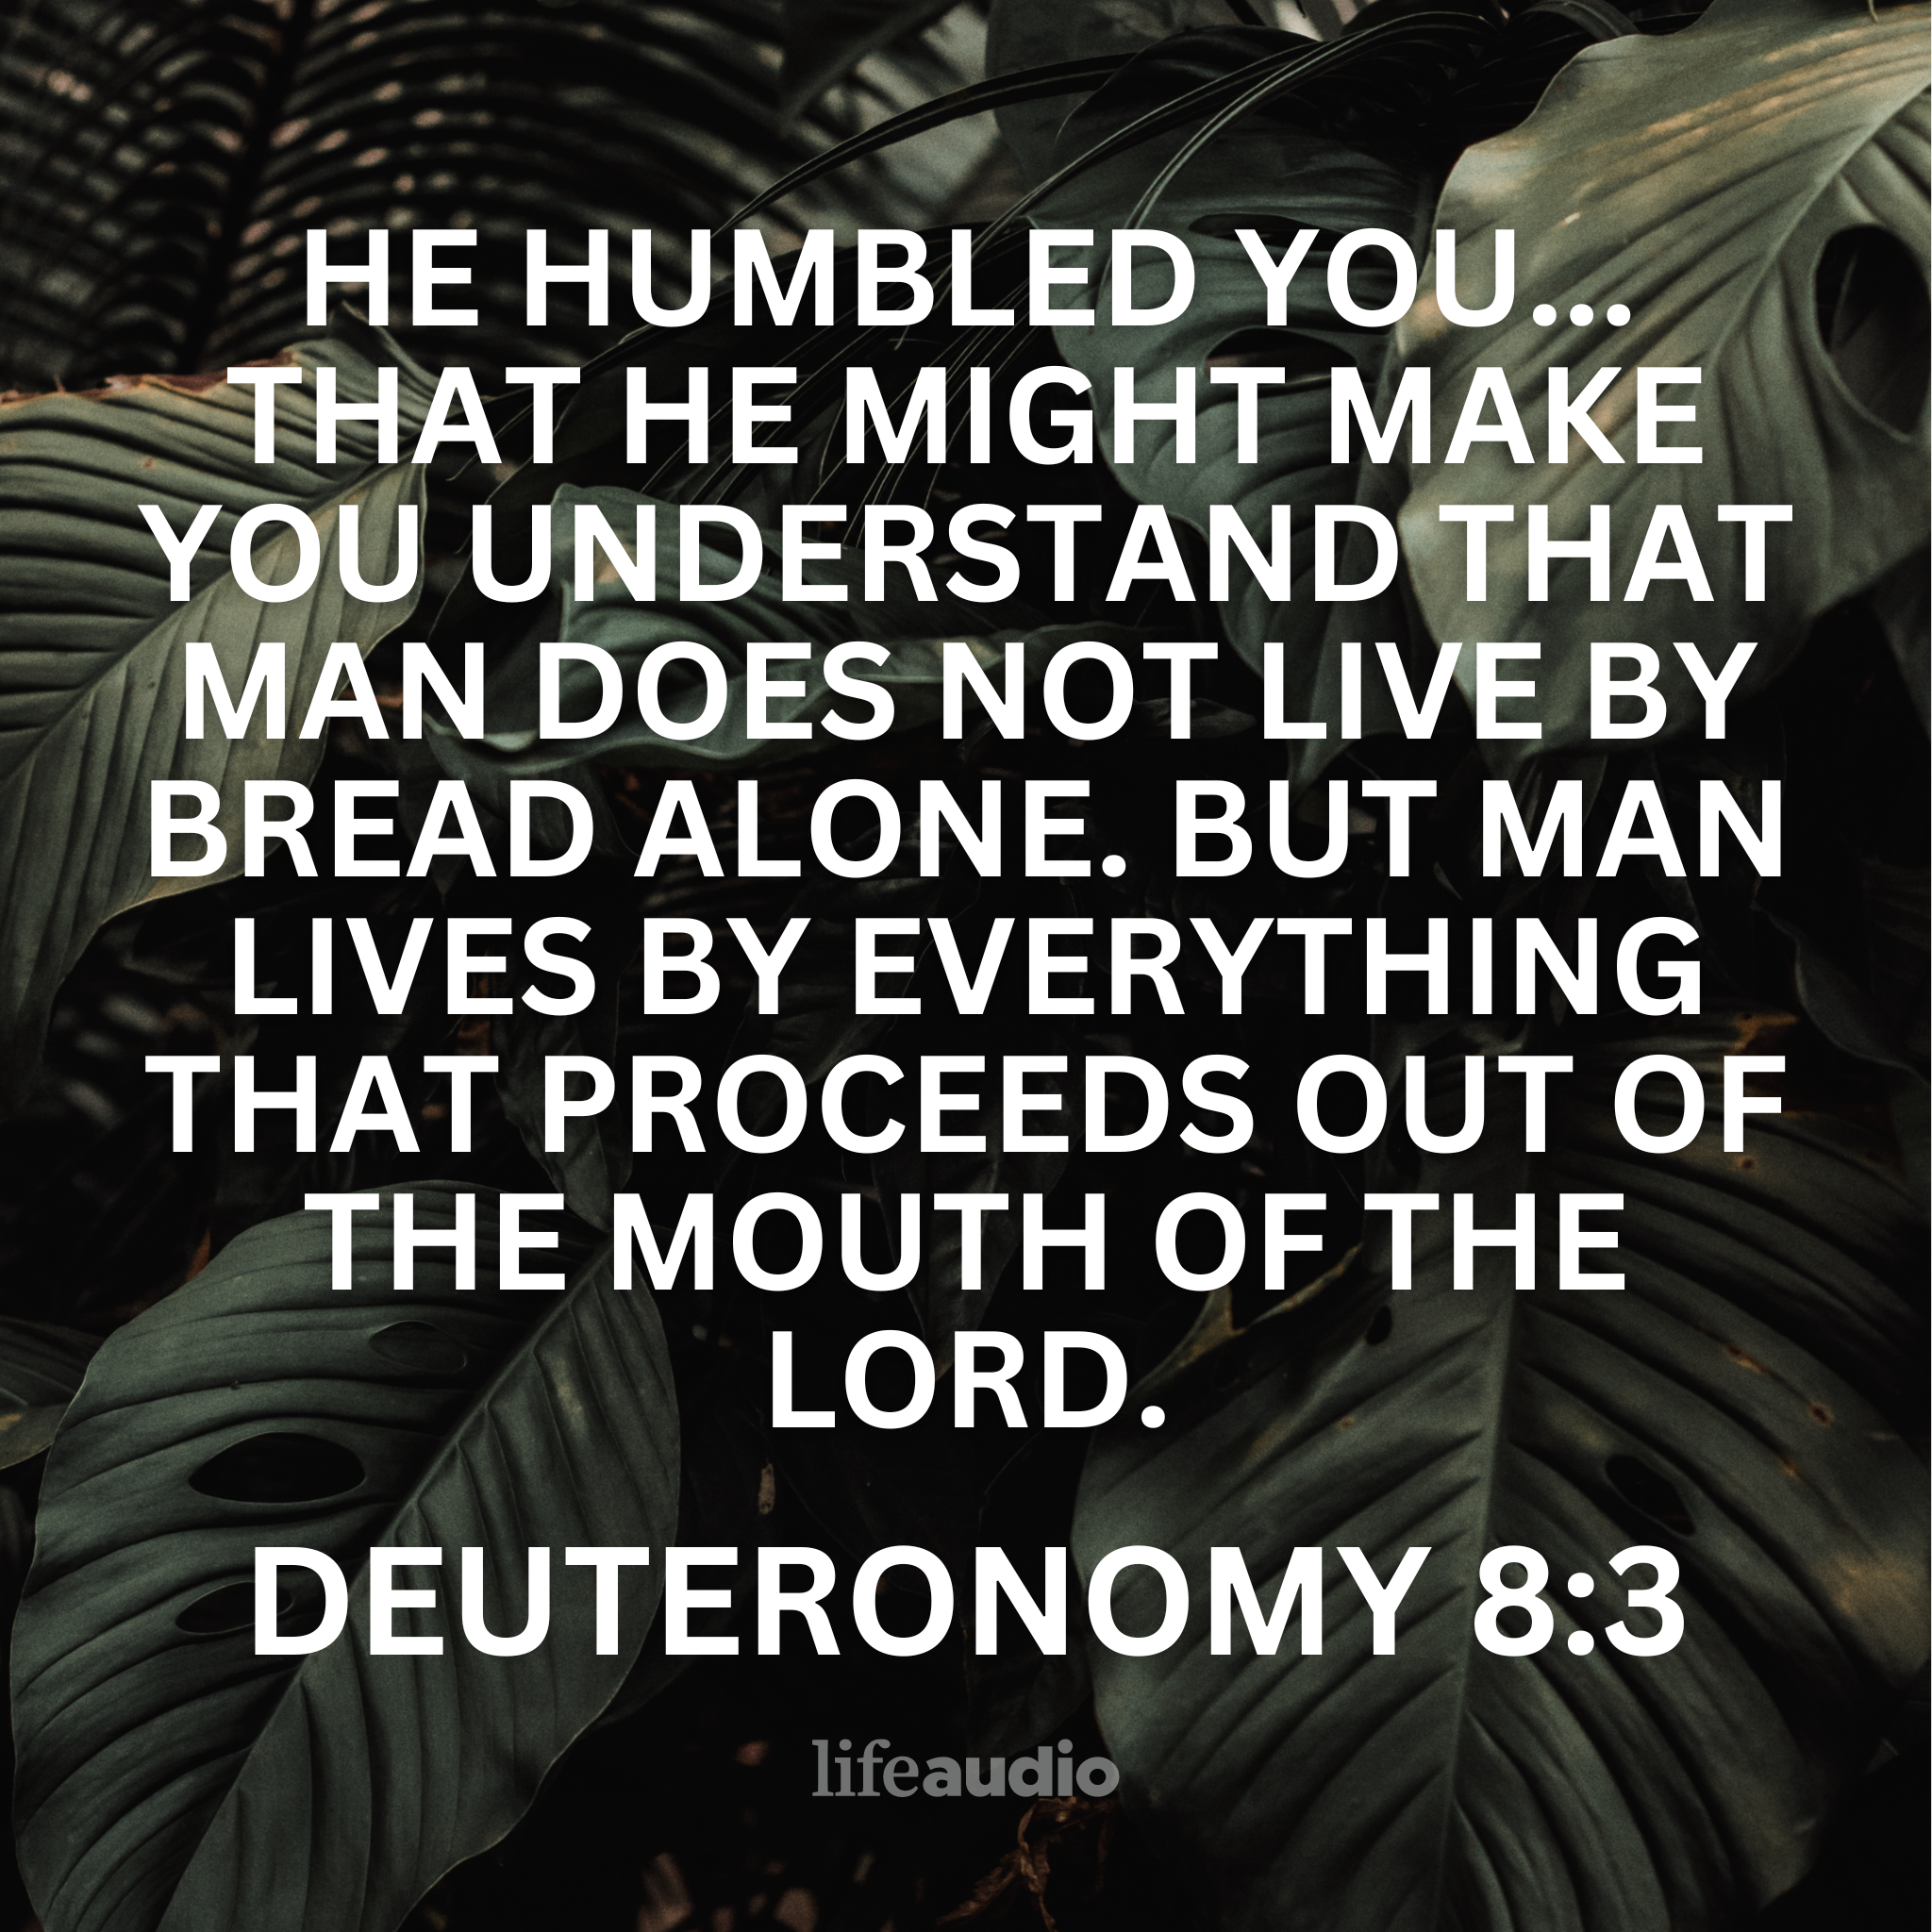 When Physical Needs Lead to Deeper Provision (Deuteronomy 8:3)